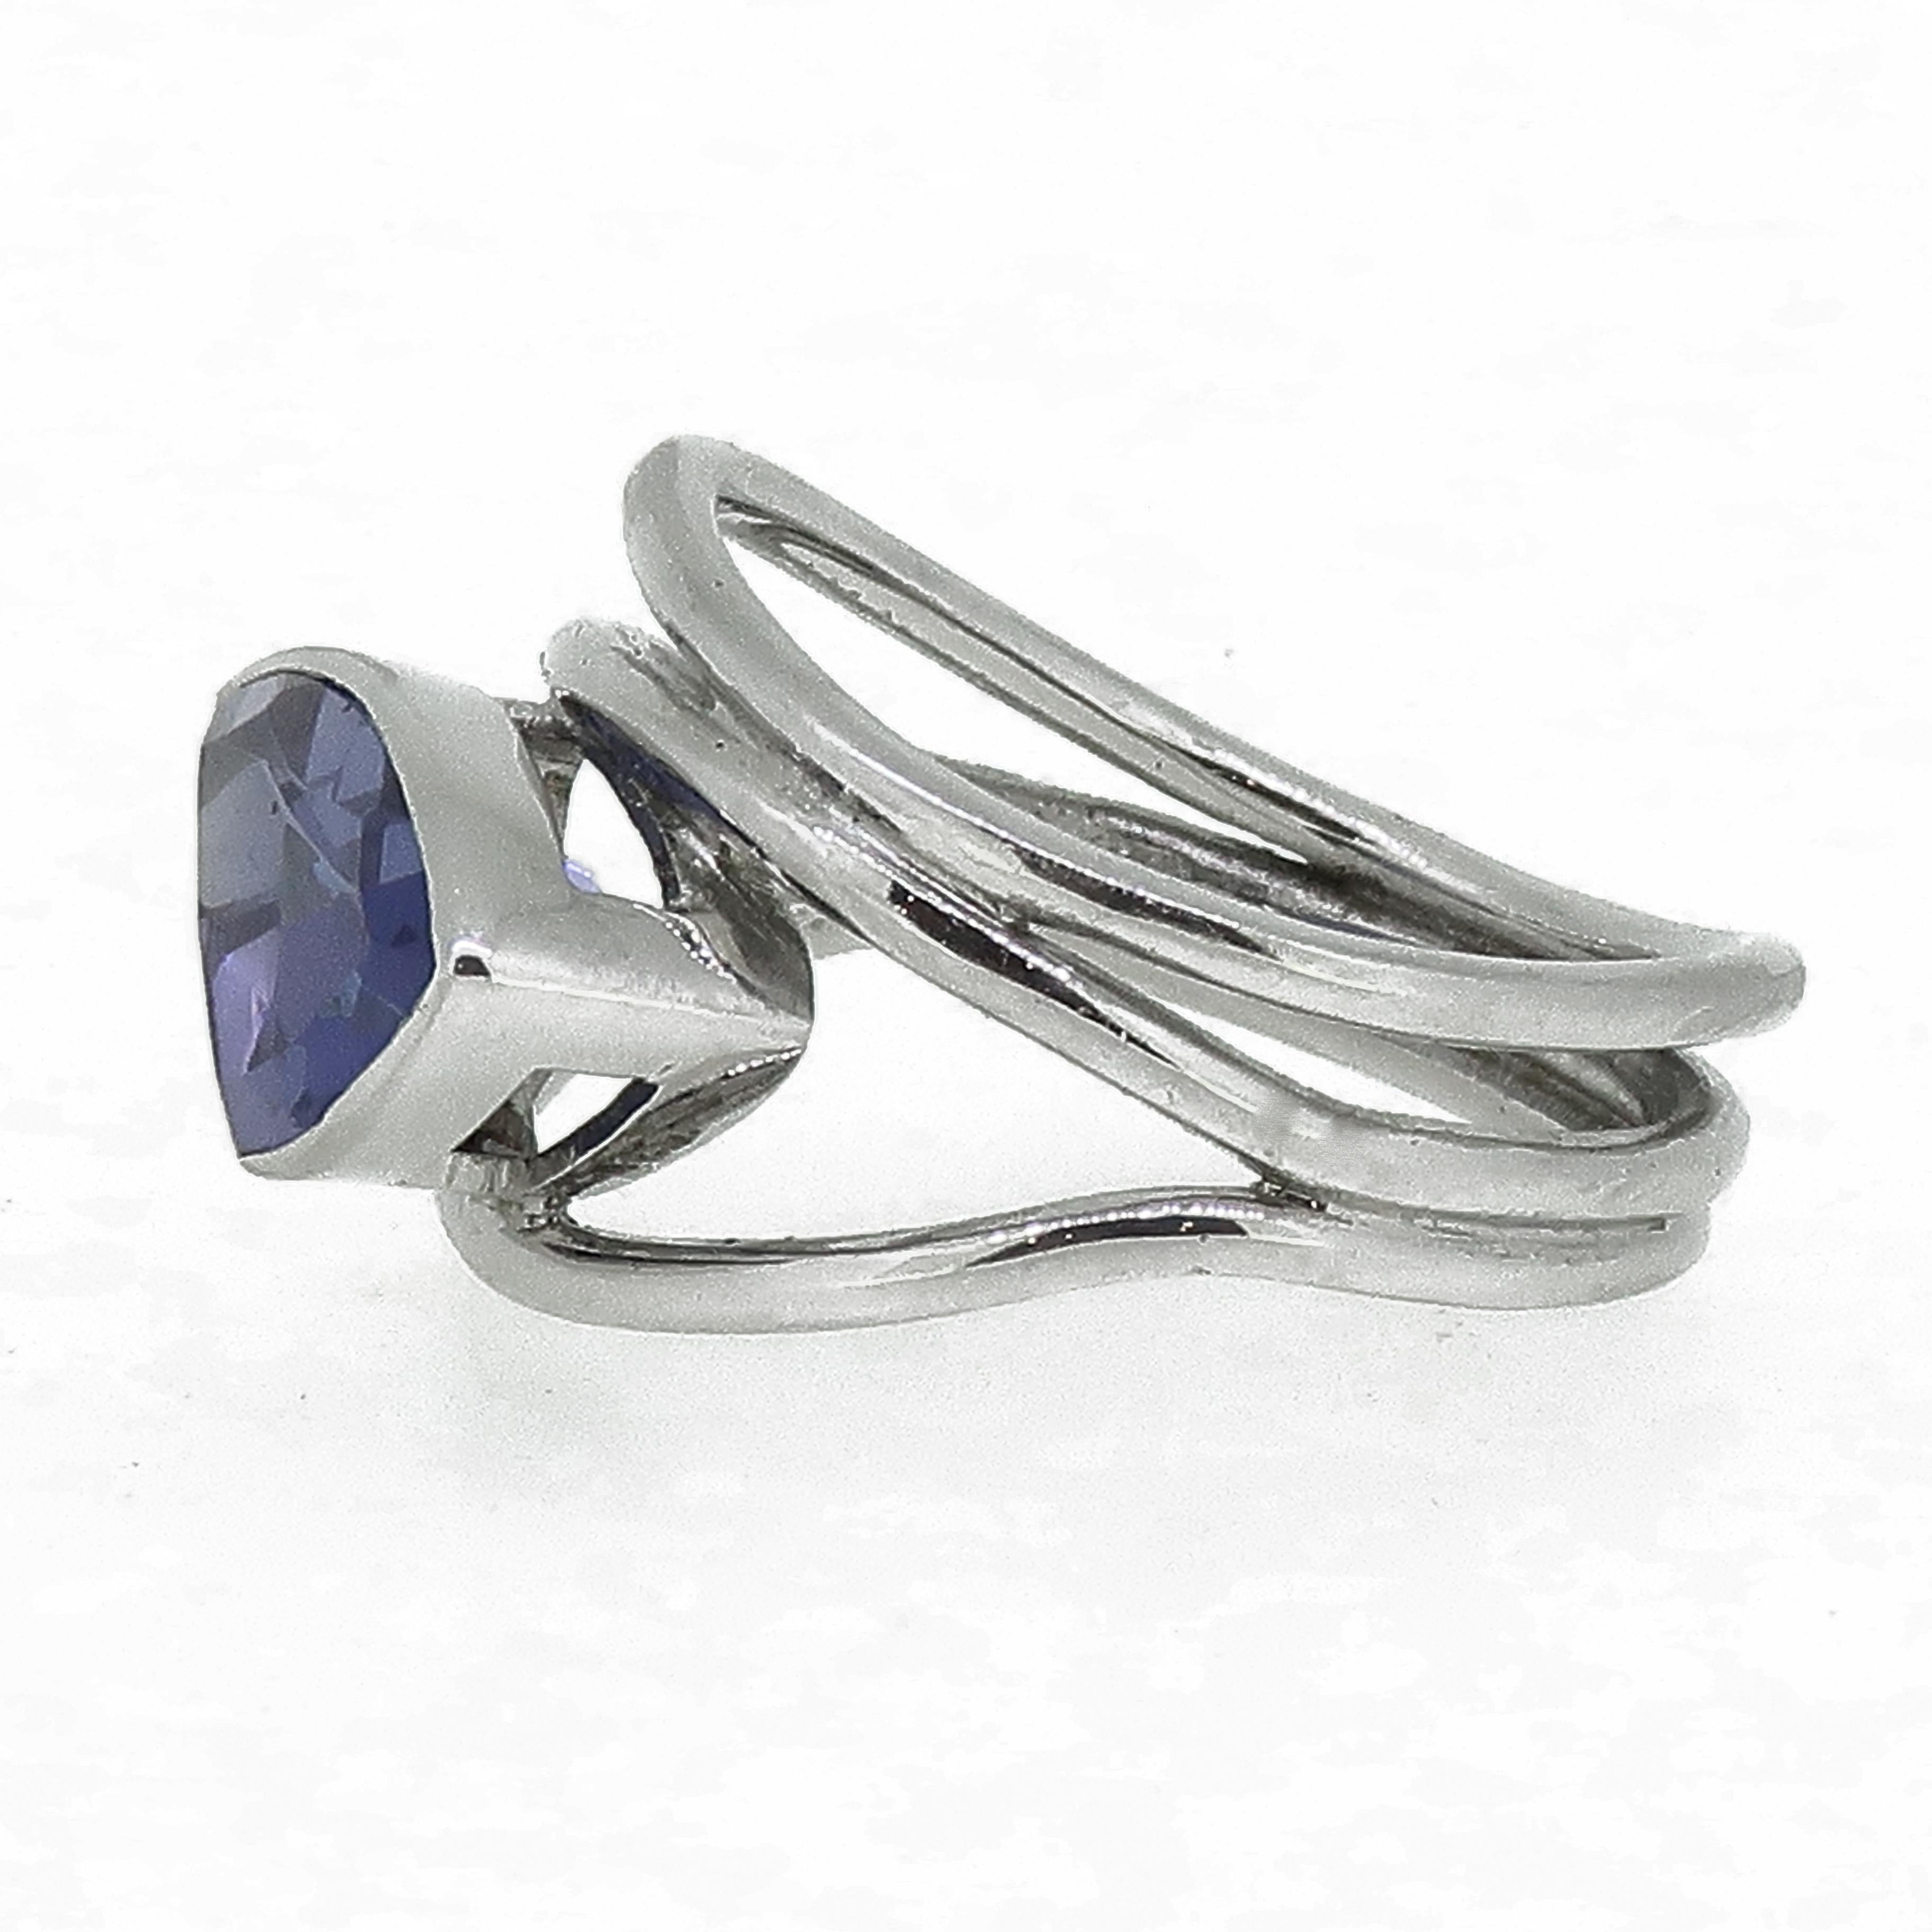 18 Karat Trillion Tanzanite Solitaire Ring White Gold

A abstract trillion tanzanite ring. Trillion tanzanite that measures 13mm x 8mm and stands proud on the finger. The fabulous stone is set in a rub over setting in between three bands of gold in